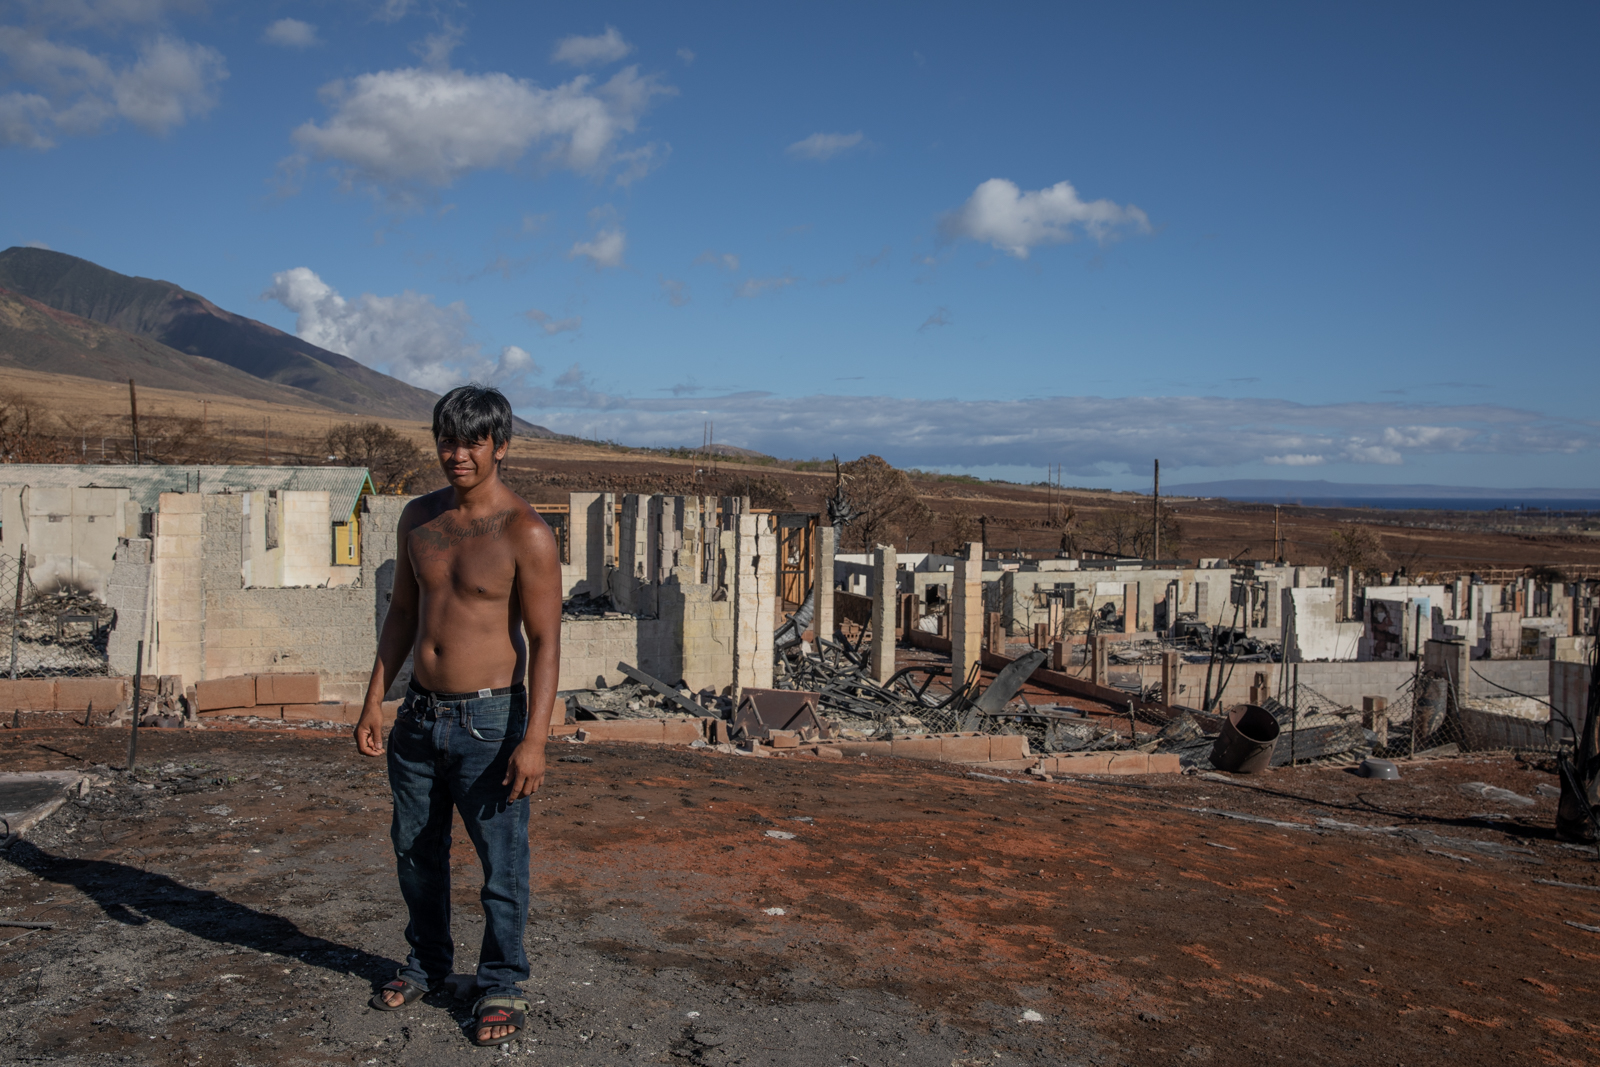 a shirtless man stands in a burned neighborhood